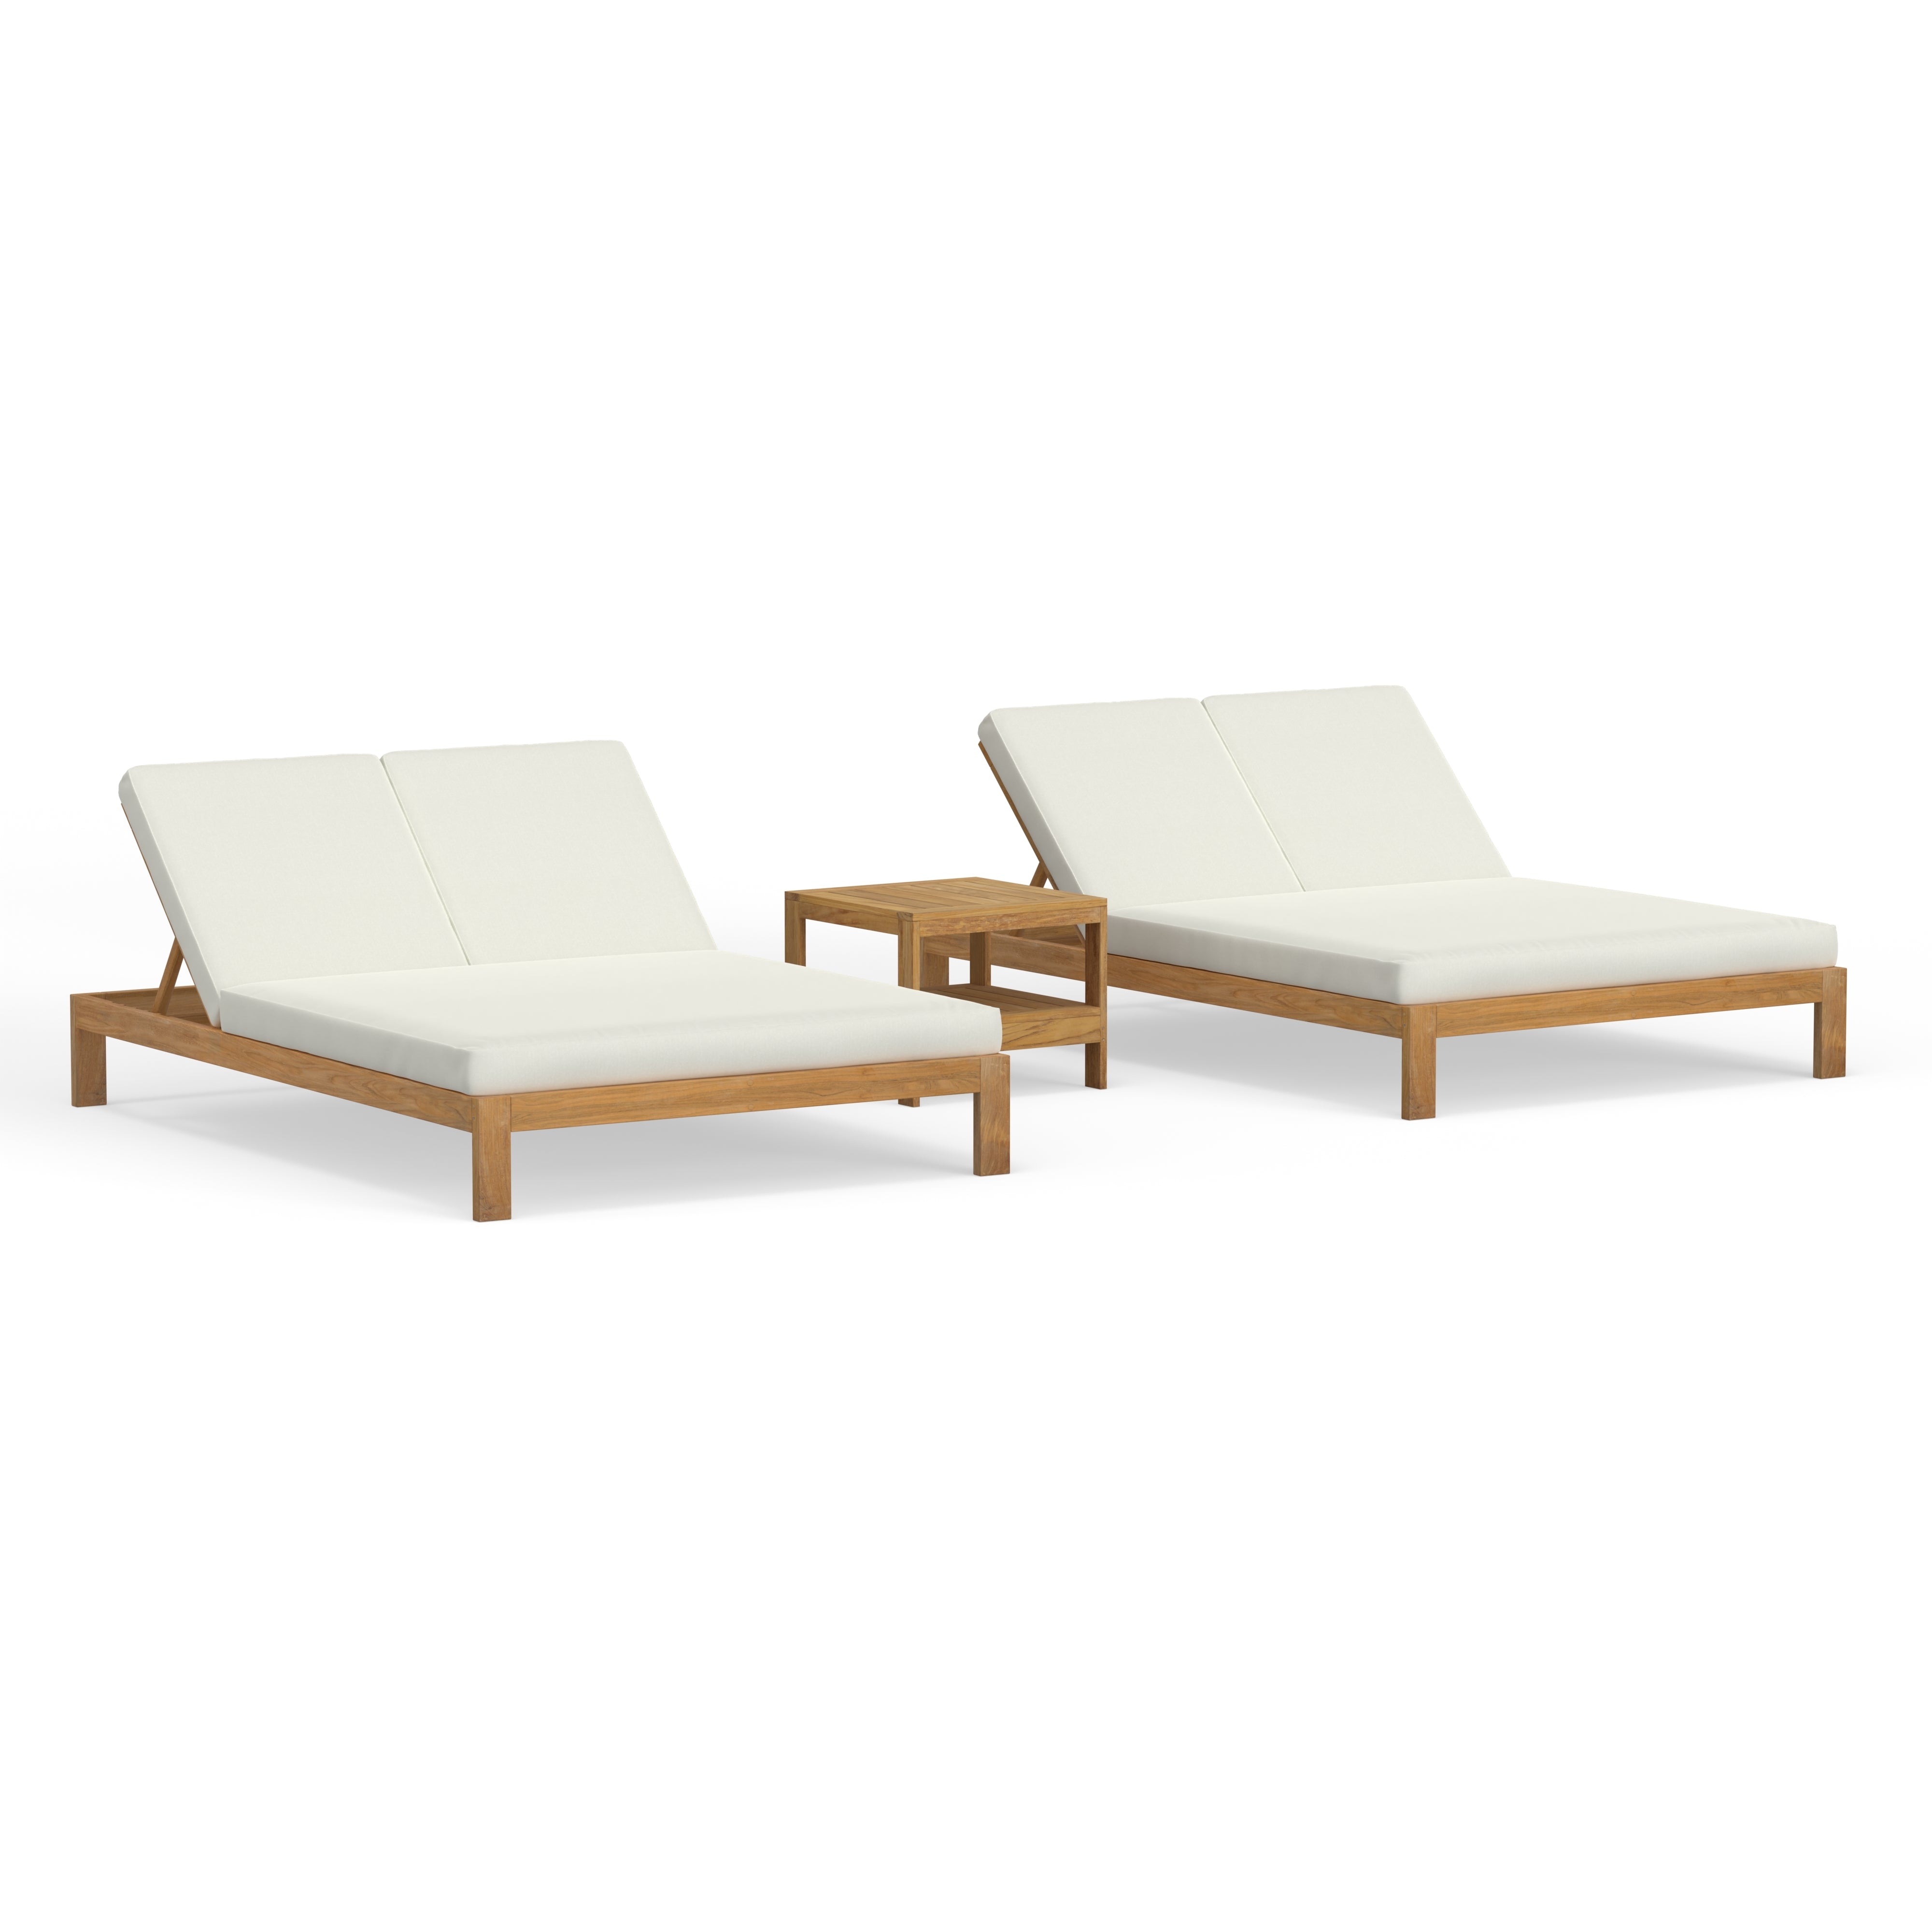 Highest Quality Luxury Outdoor Teak Double Chaise Lounge